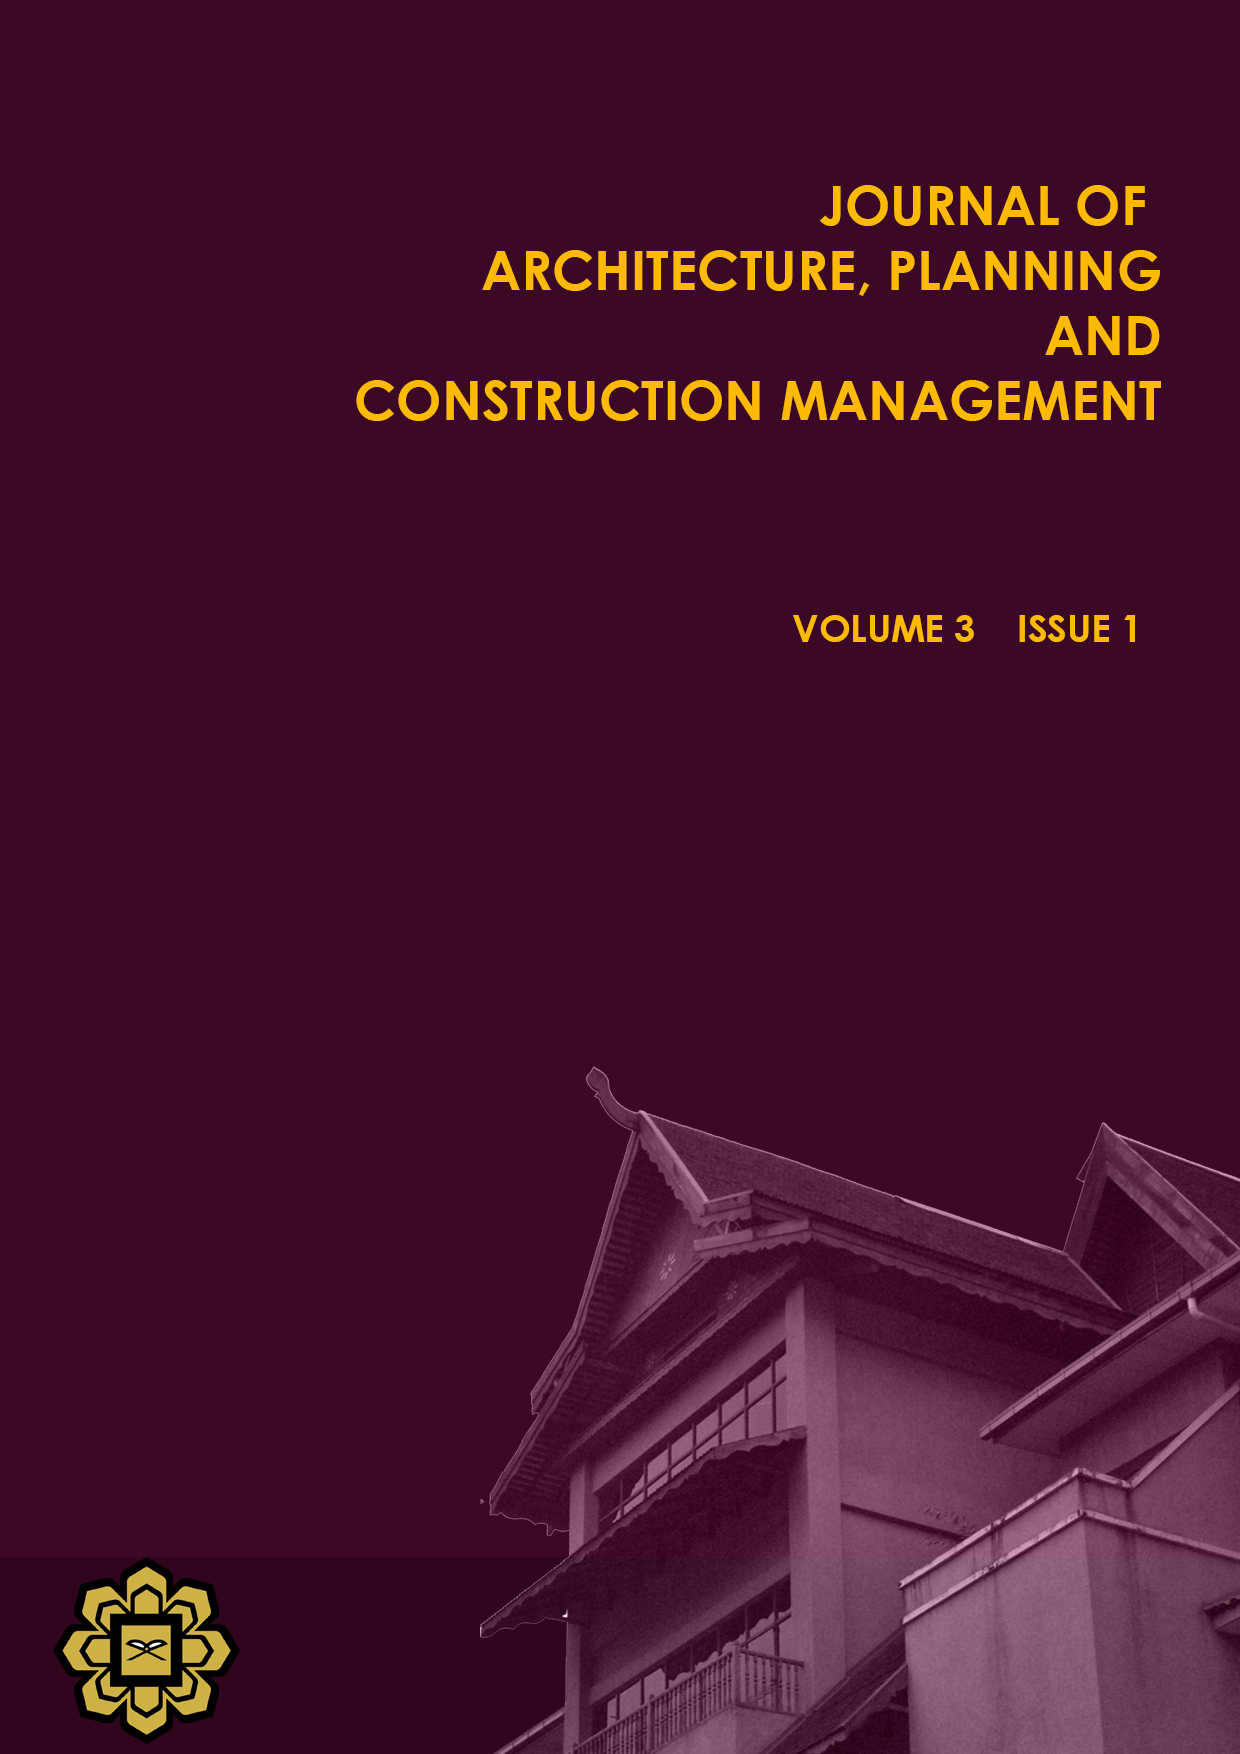 					View Vol. 3 No. 1 (2013): Journal of Architecture, Planning and Construction Management (JAPCM) 
				